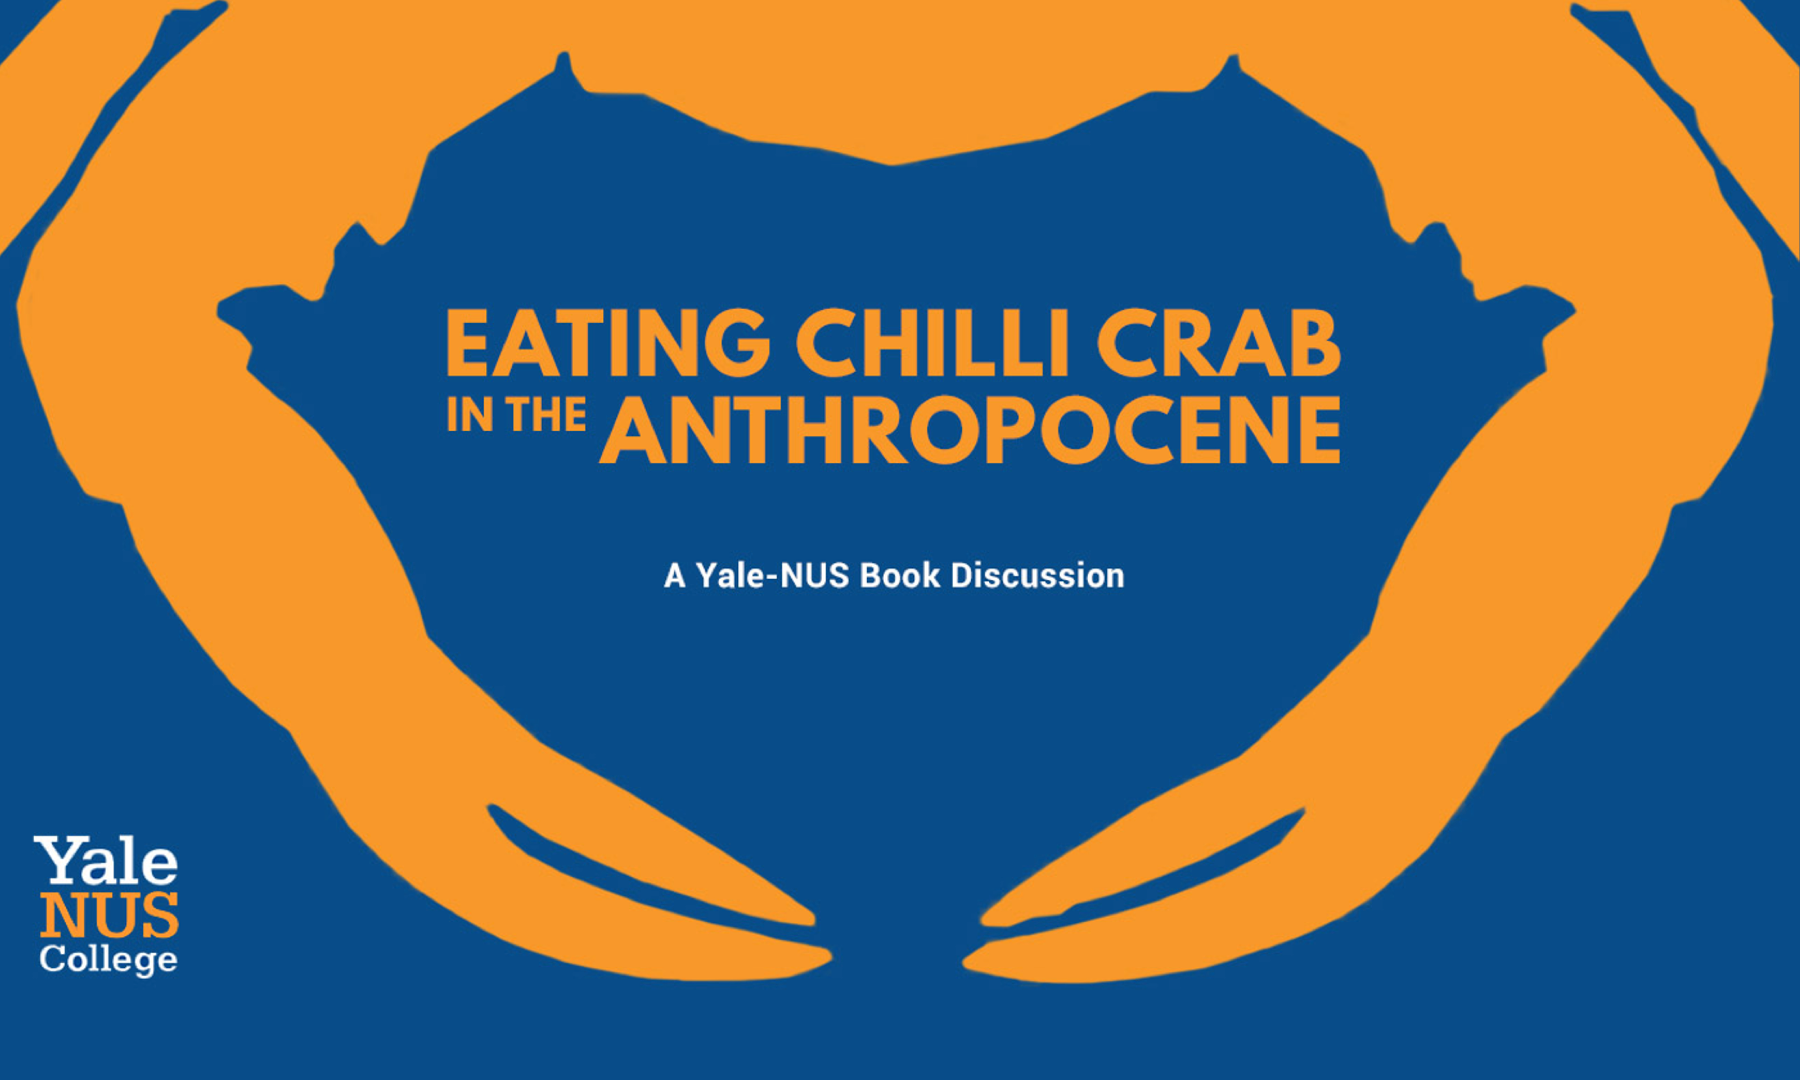 Eating Chili Crab in the Anthropocene